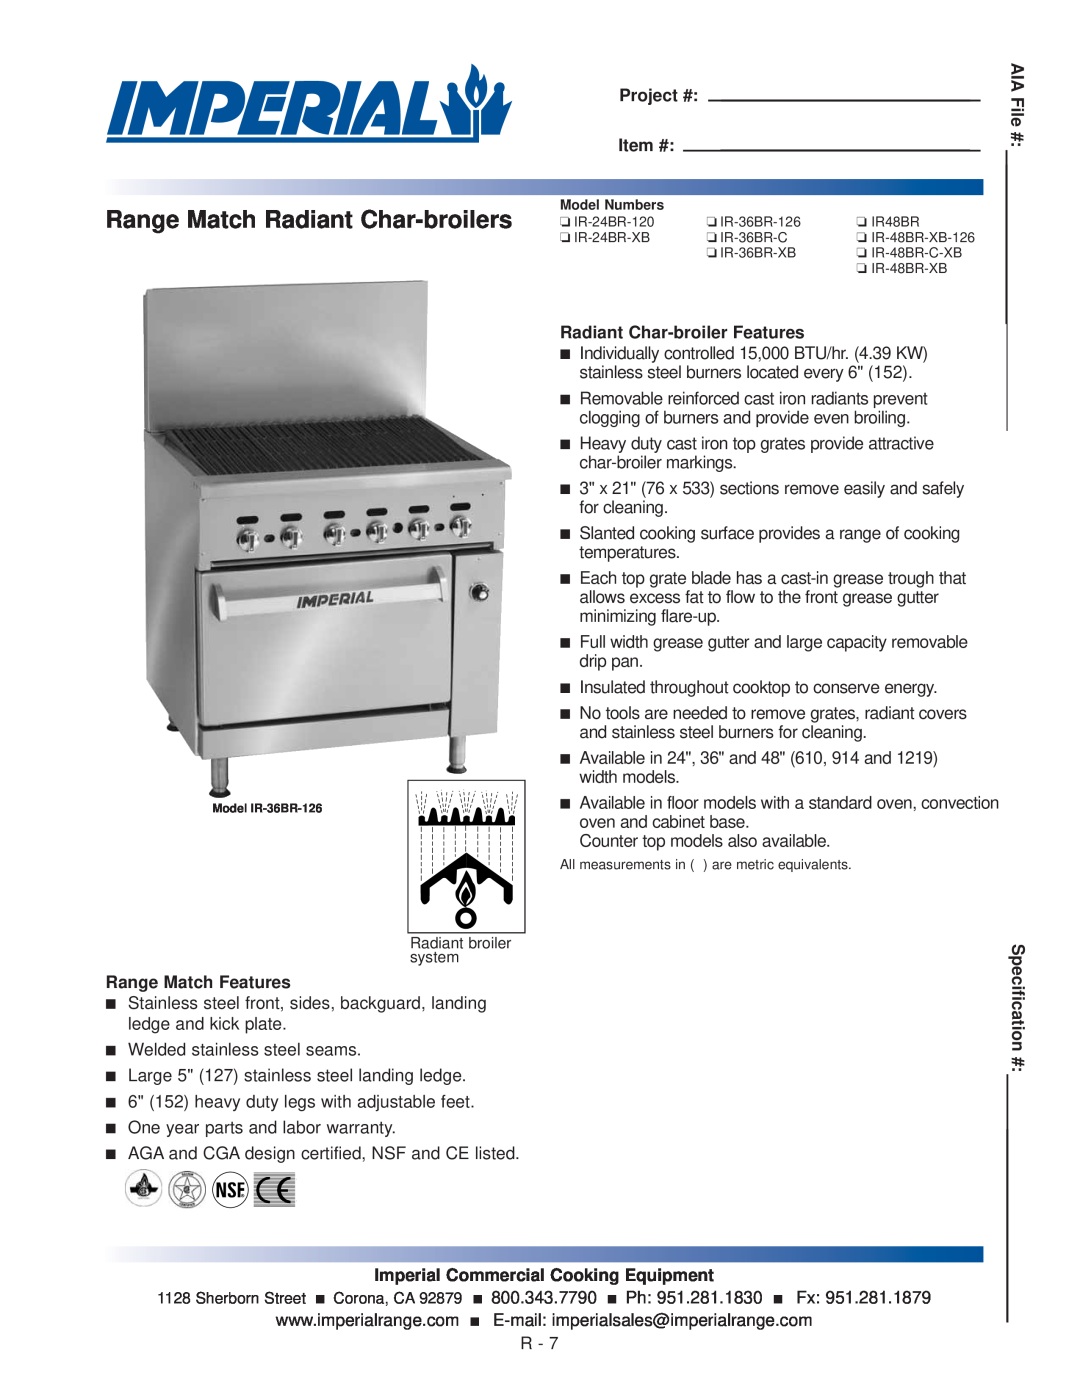 Imperial Range IR-24BR-120 warranty Range Match Radiant Char-broilers, AIA File #, Range Match Features, Specification # 